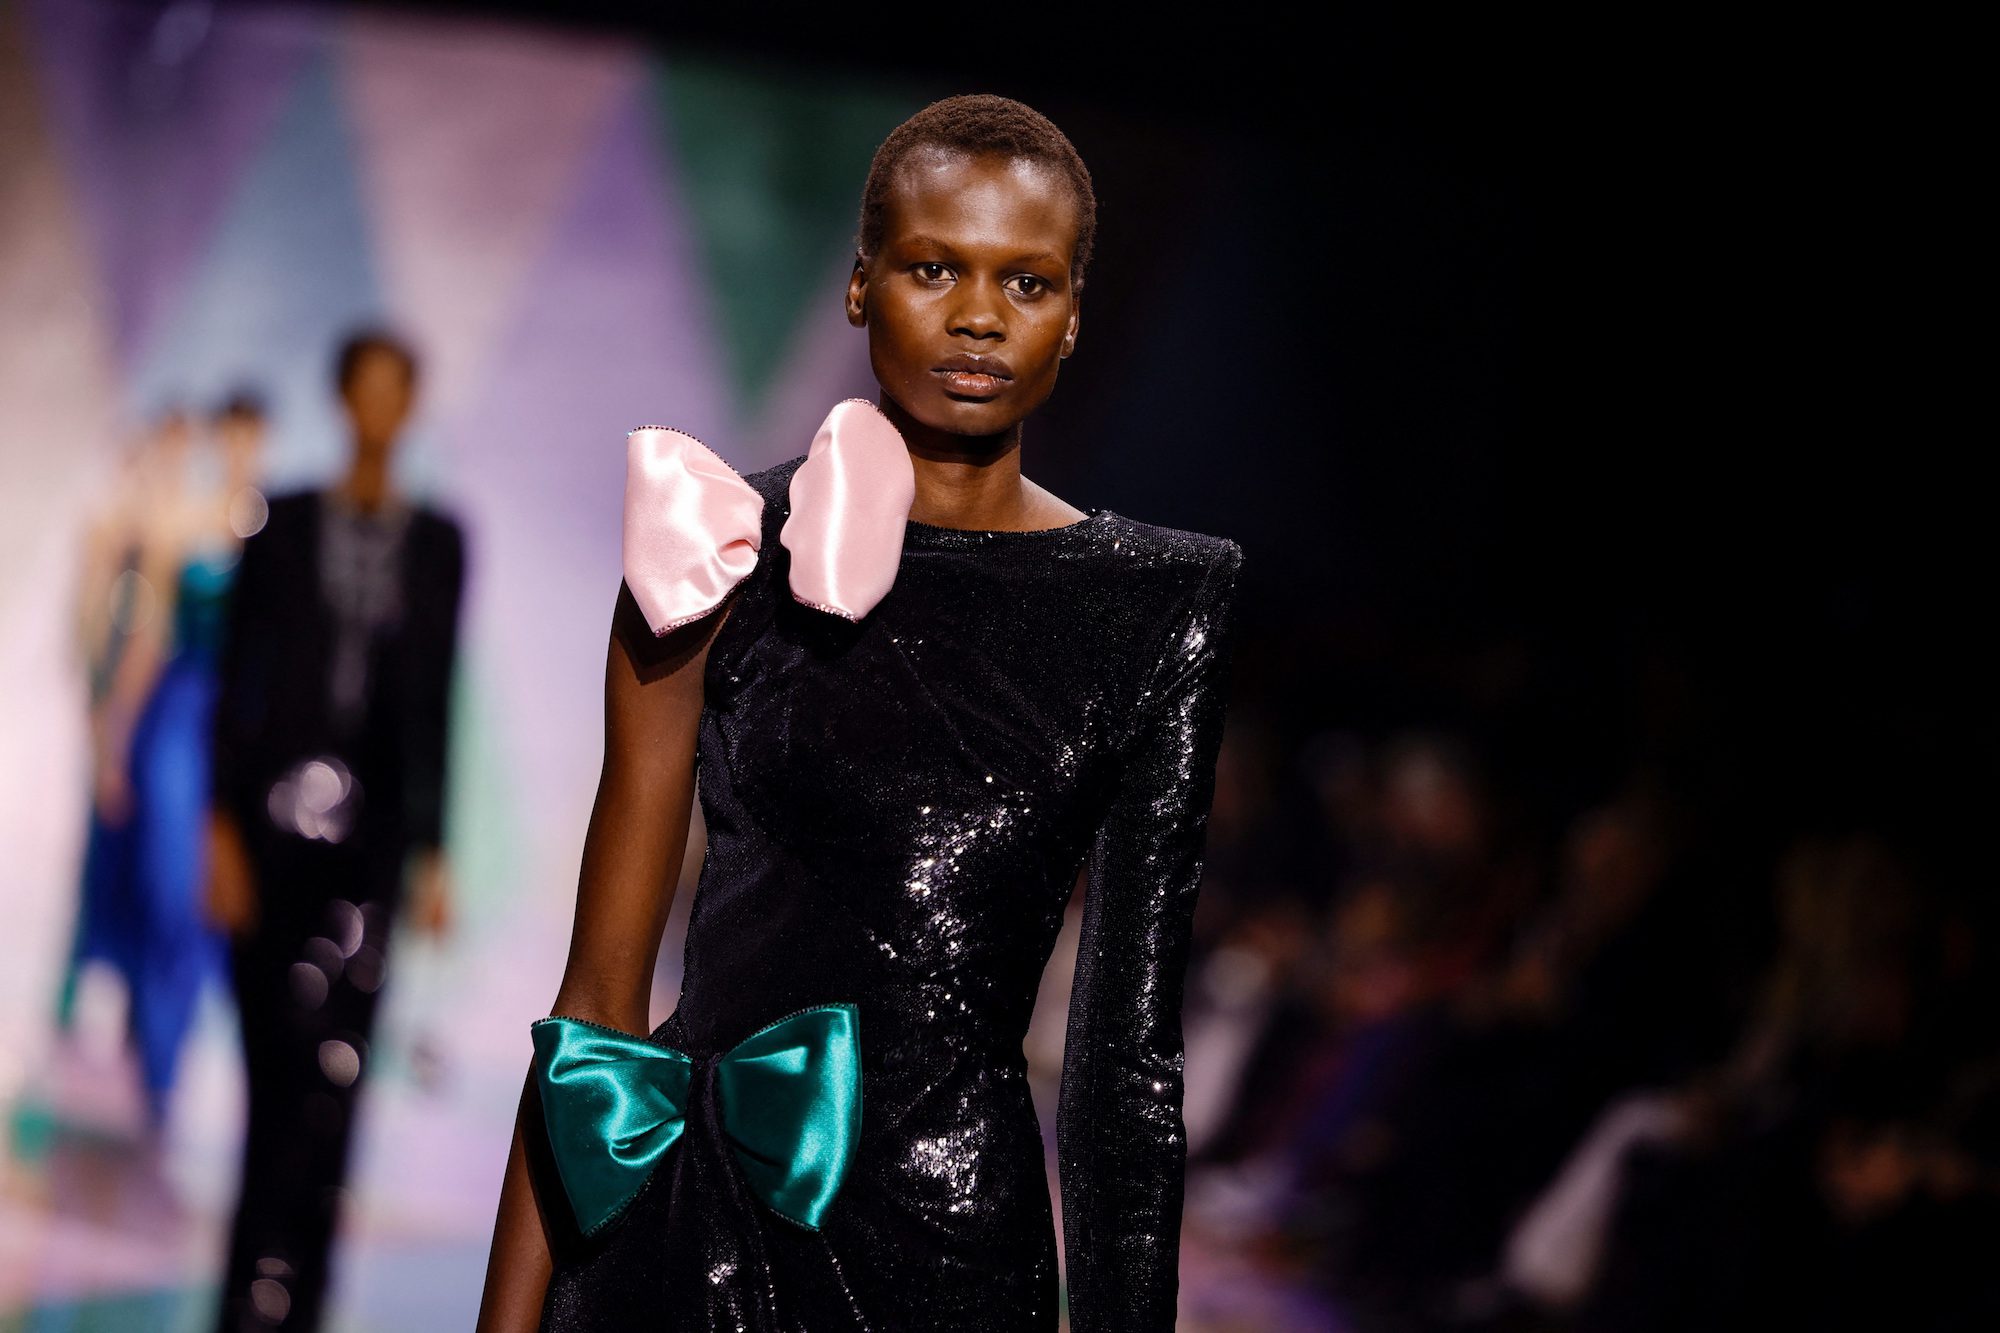 The most memorable looks from Paris Haute Couture Fashion Week 2023